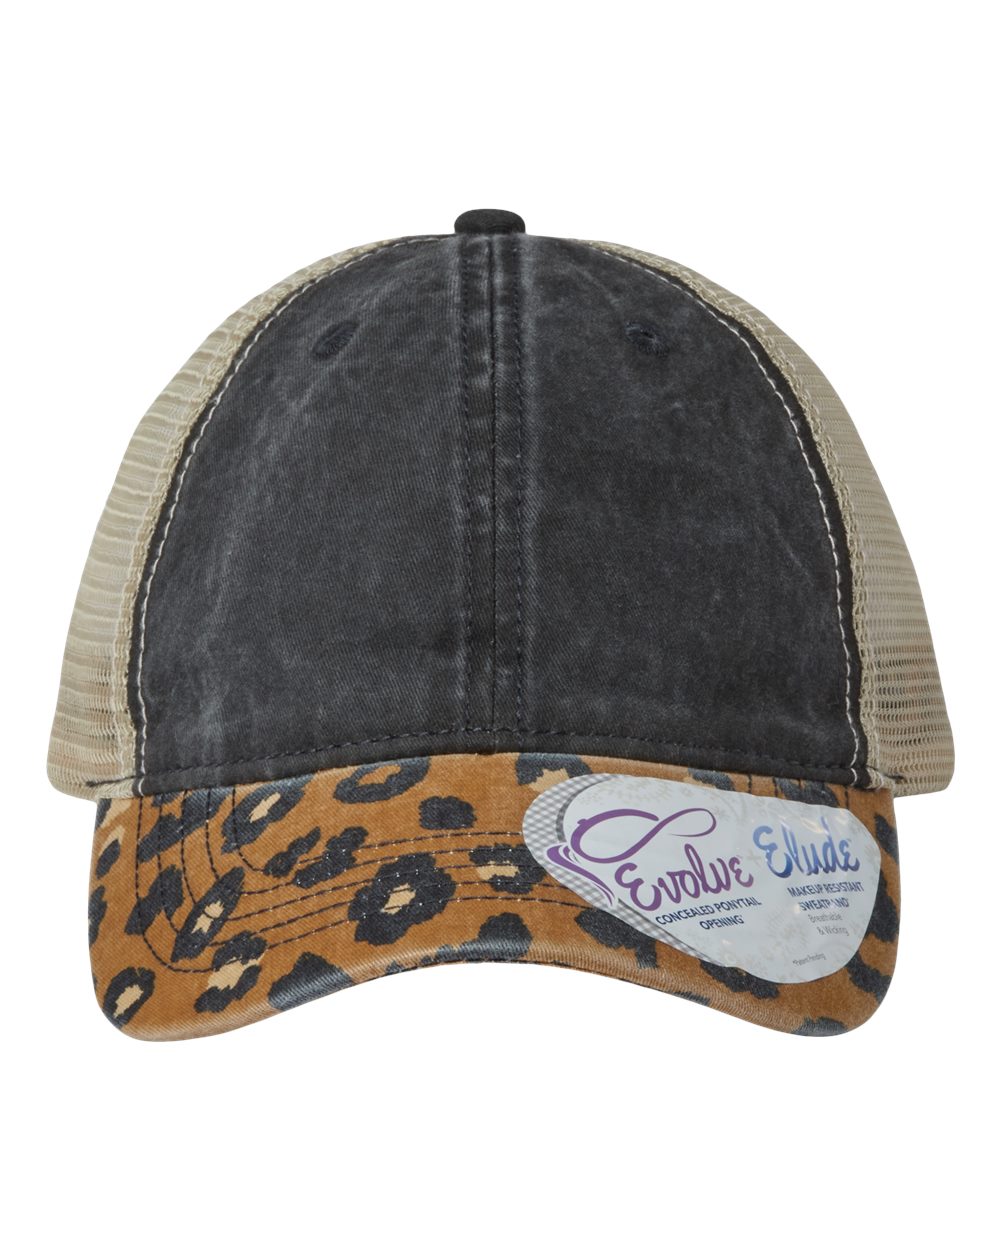 A women's printed visor with mesh back cap in black, featuring leopard print on the visor and khaki mesh back.